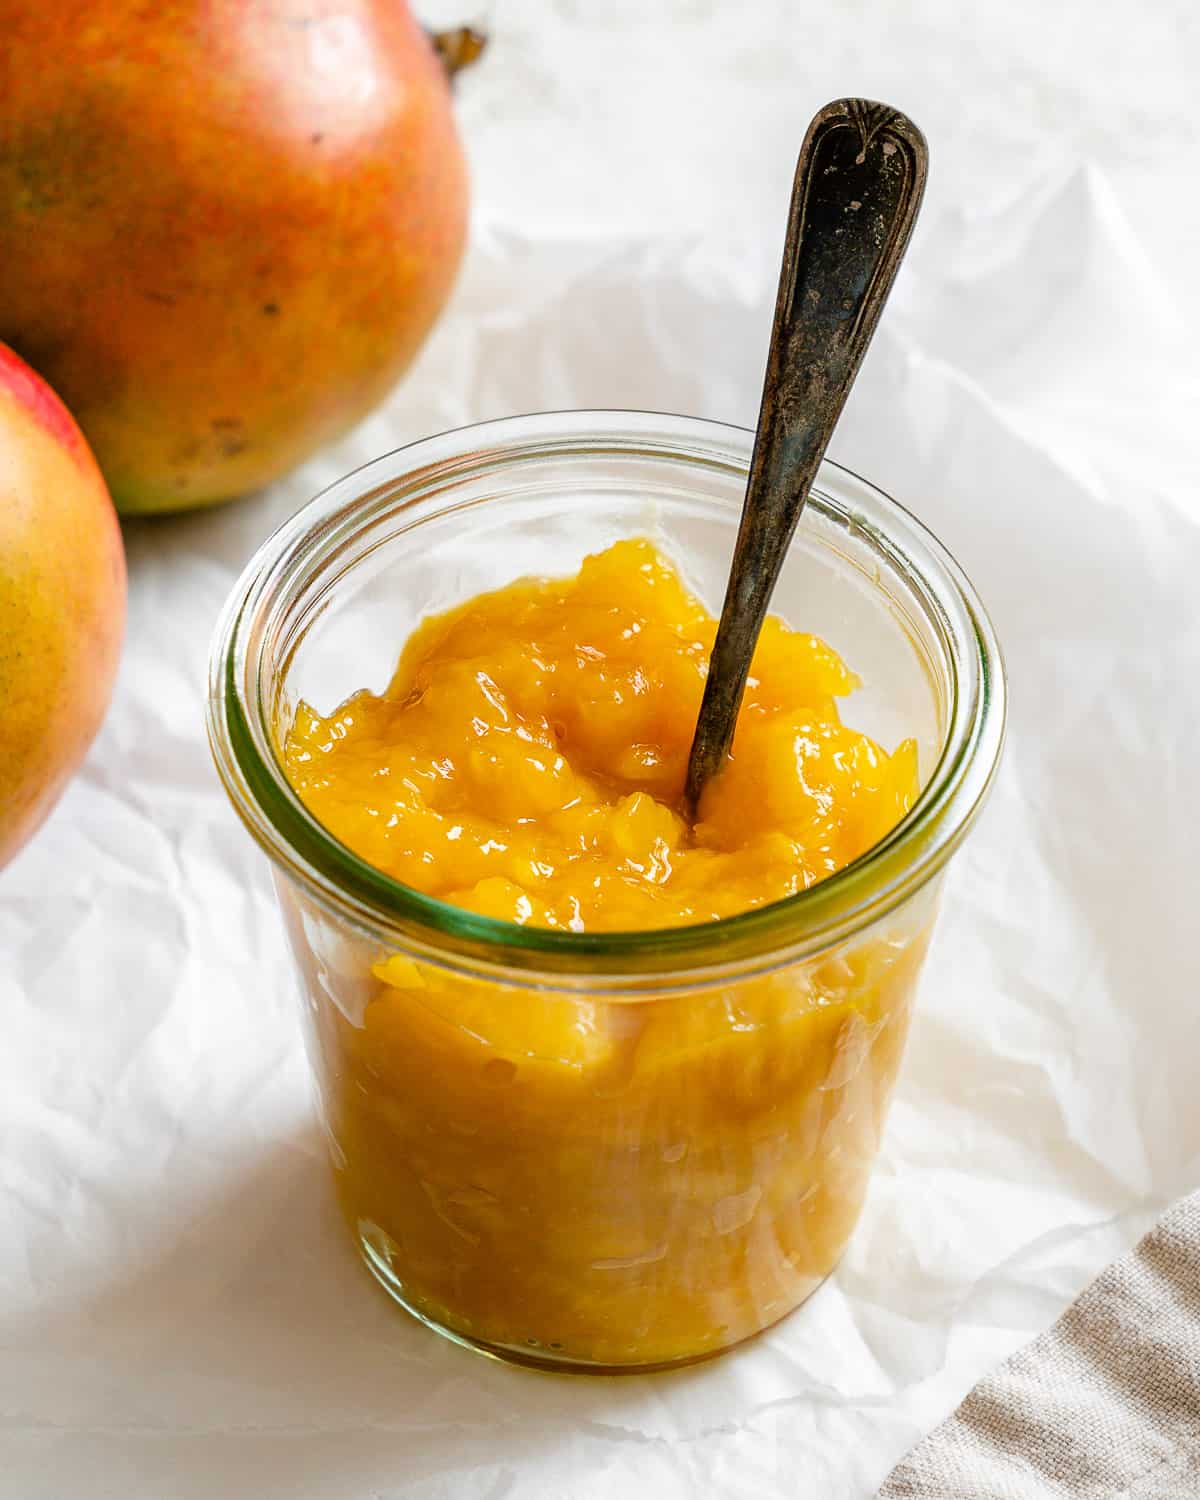 completed mango compote in a jar against a light background